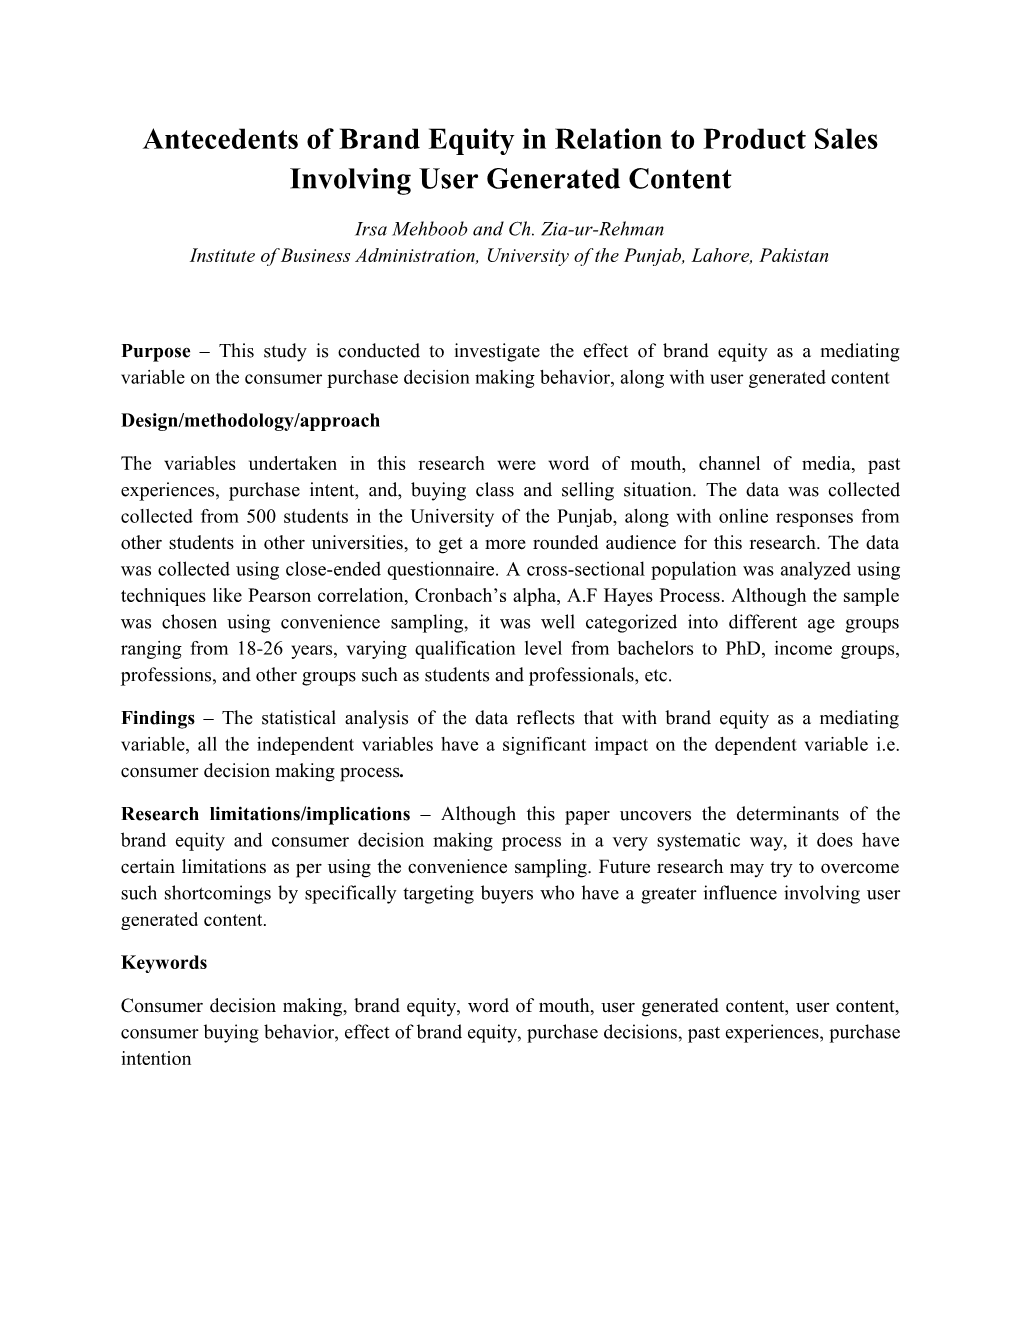 Antecedents of Brand Equity in Relation to Product Sales Involving User Generated Content